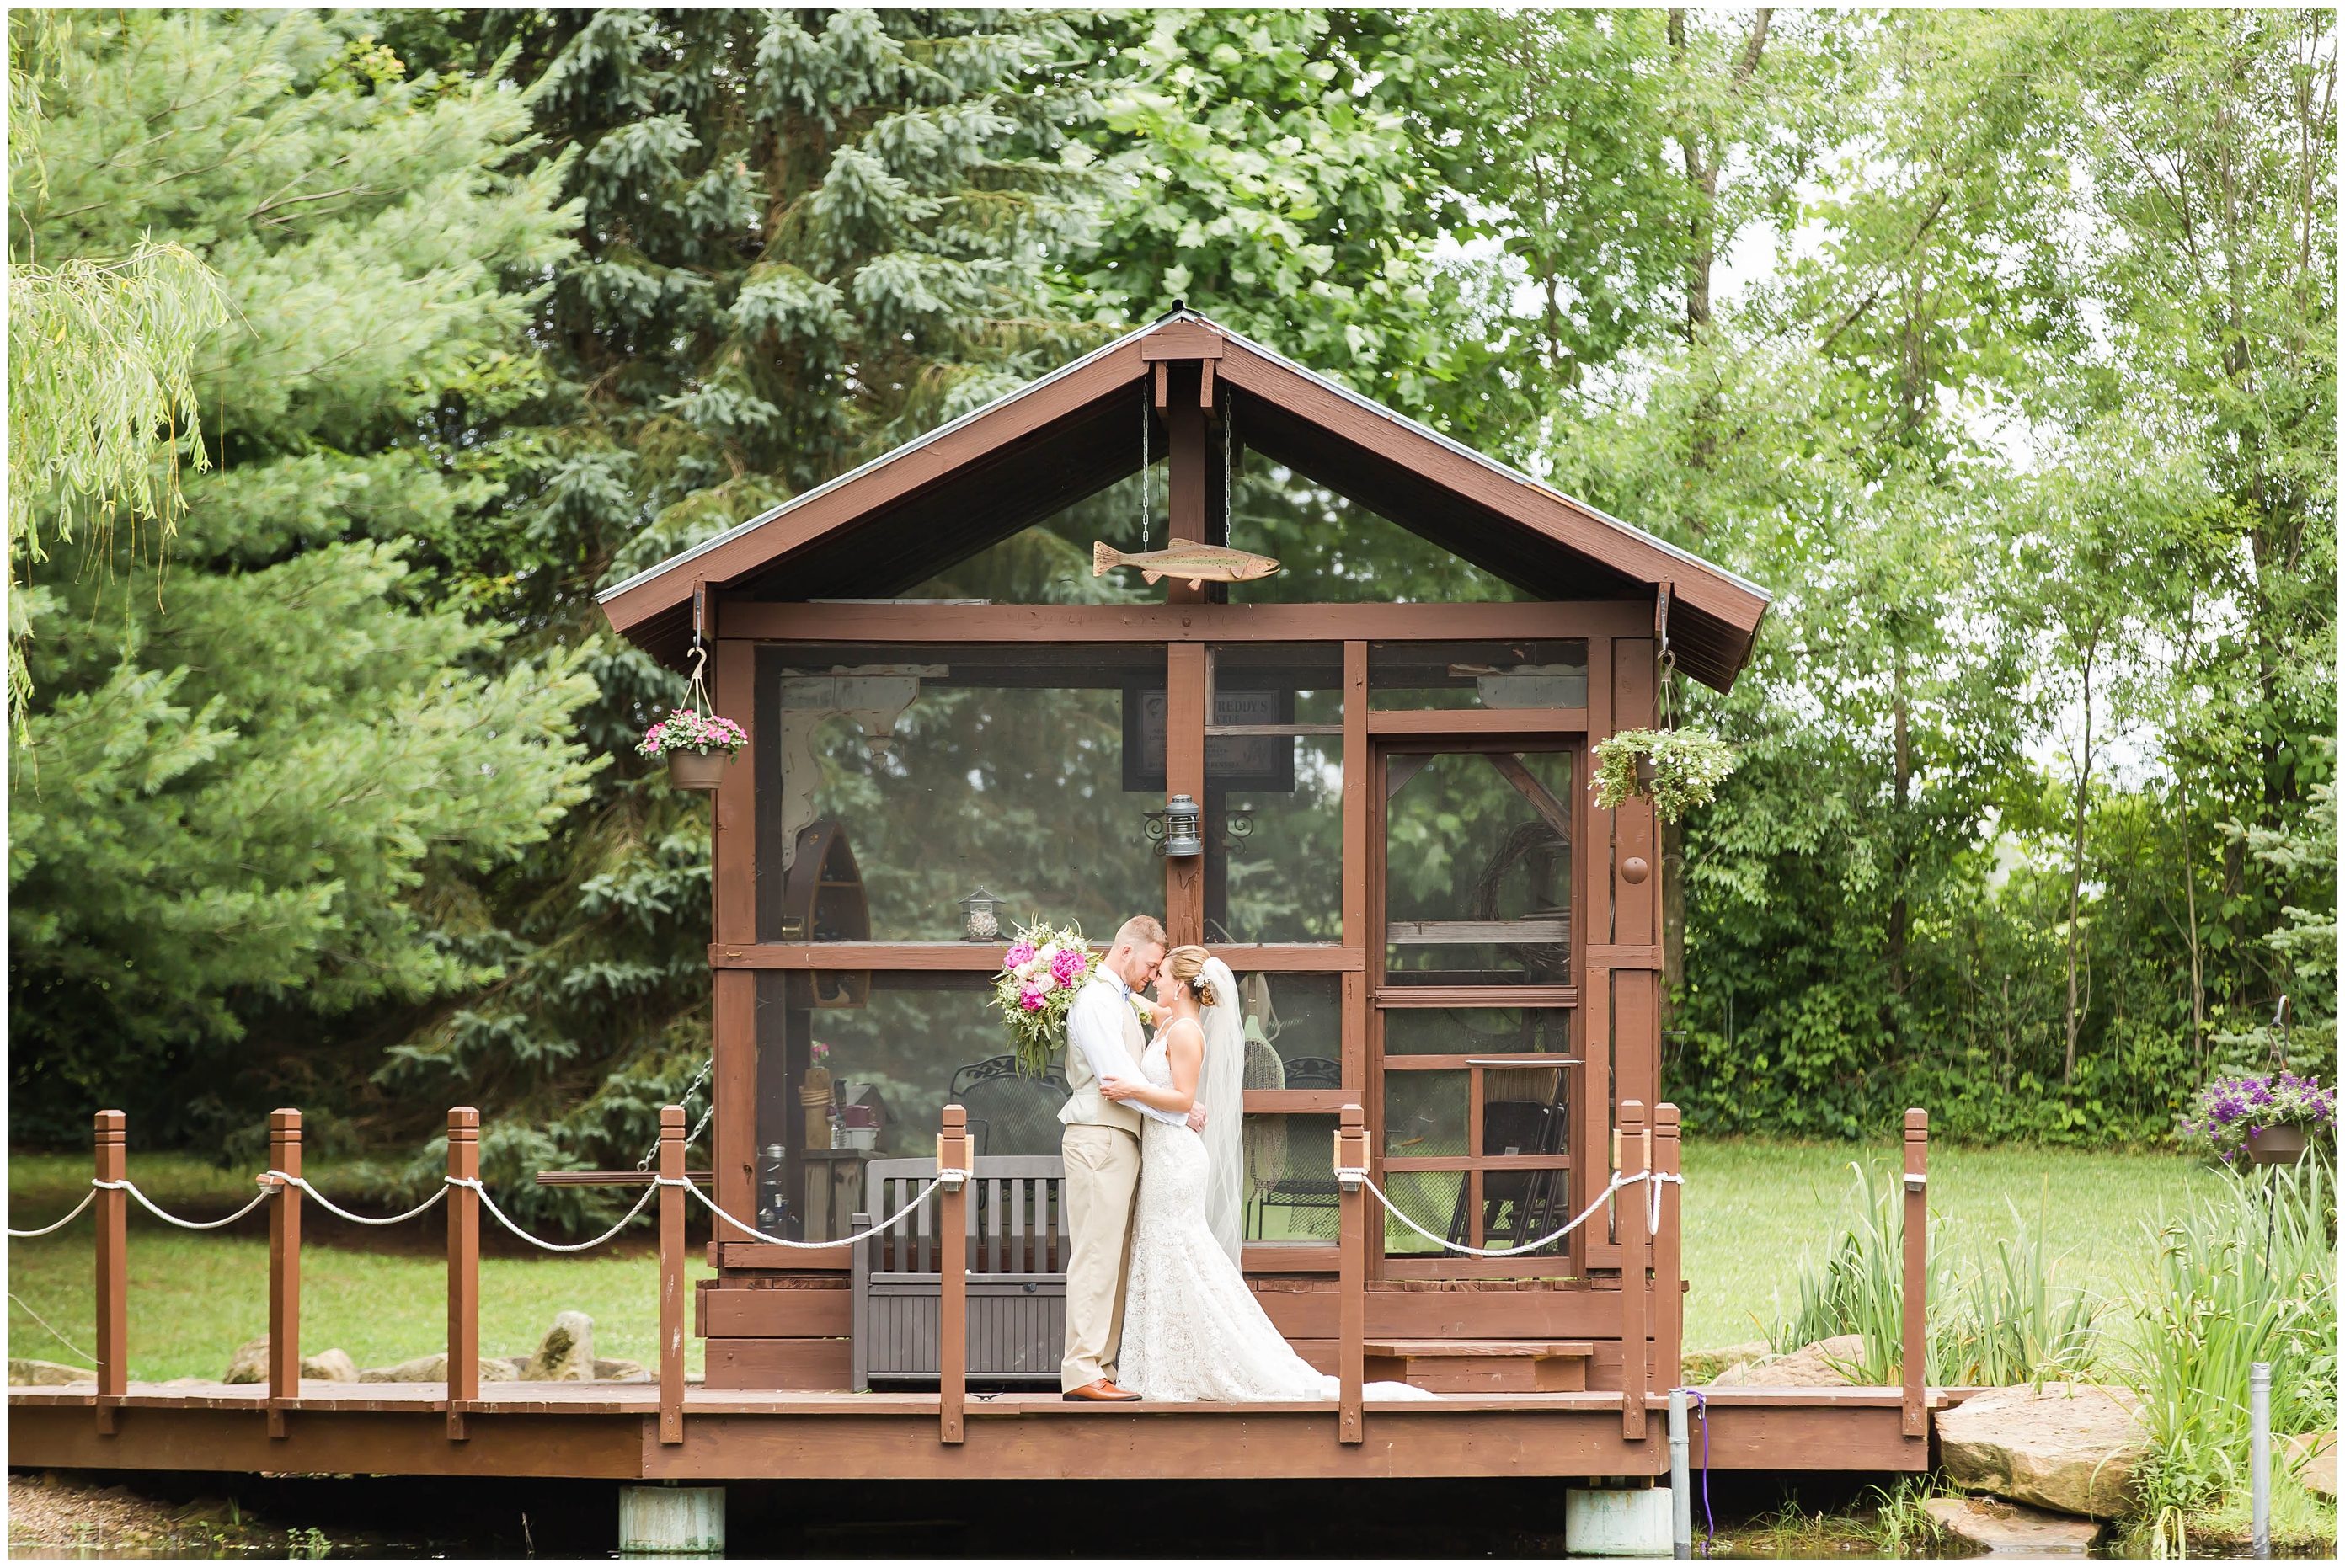 Cleveland Wedding Photographer,Country Cottage and Garden Wedding,big greenery florals,lace wedding dress,loren jackson photography,photographer akron ohio,tan groomsmen suits,